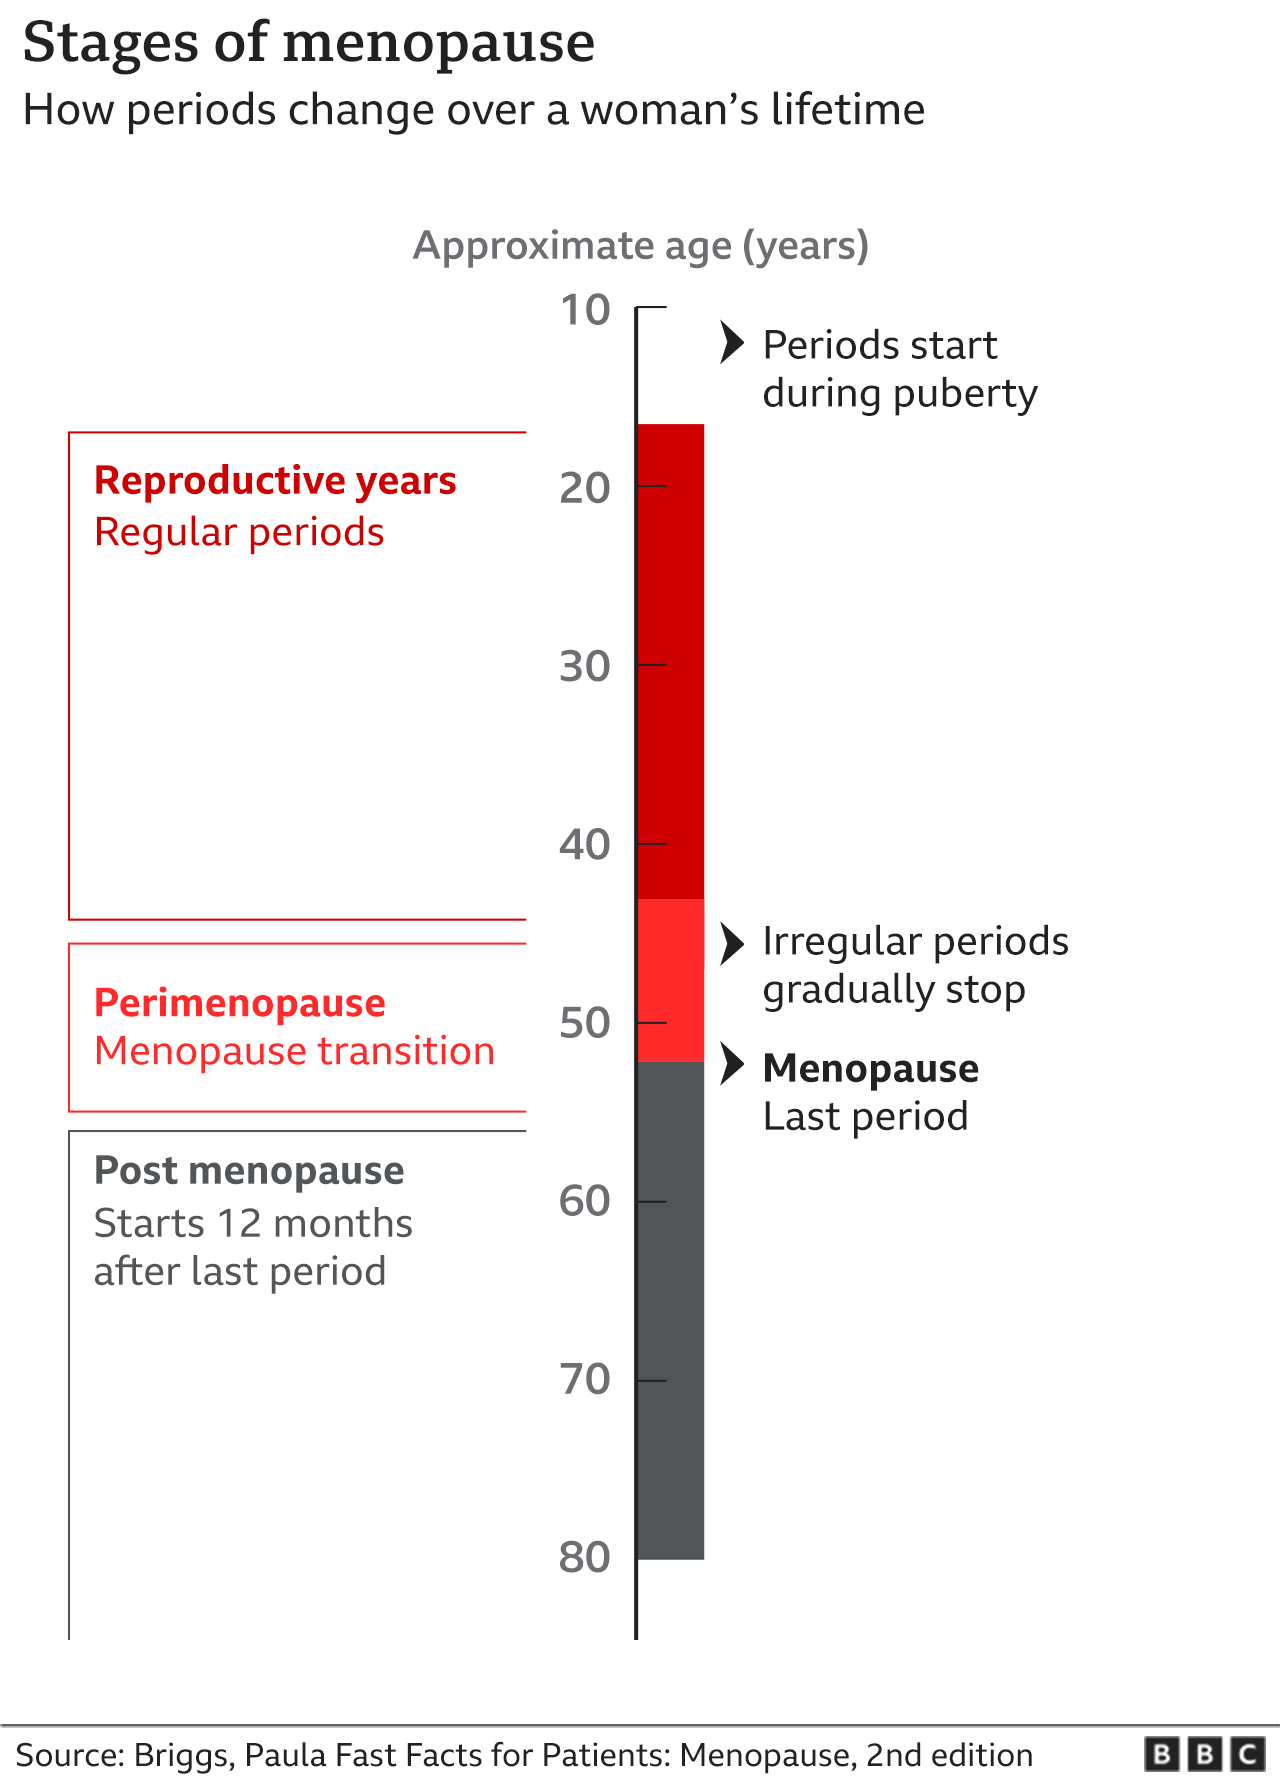 Timeline of how periods change over a woman's life